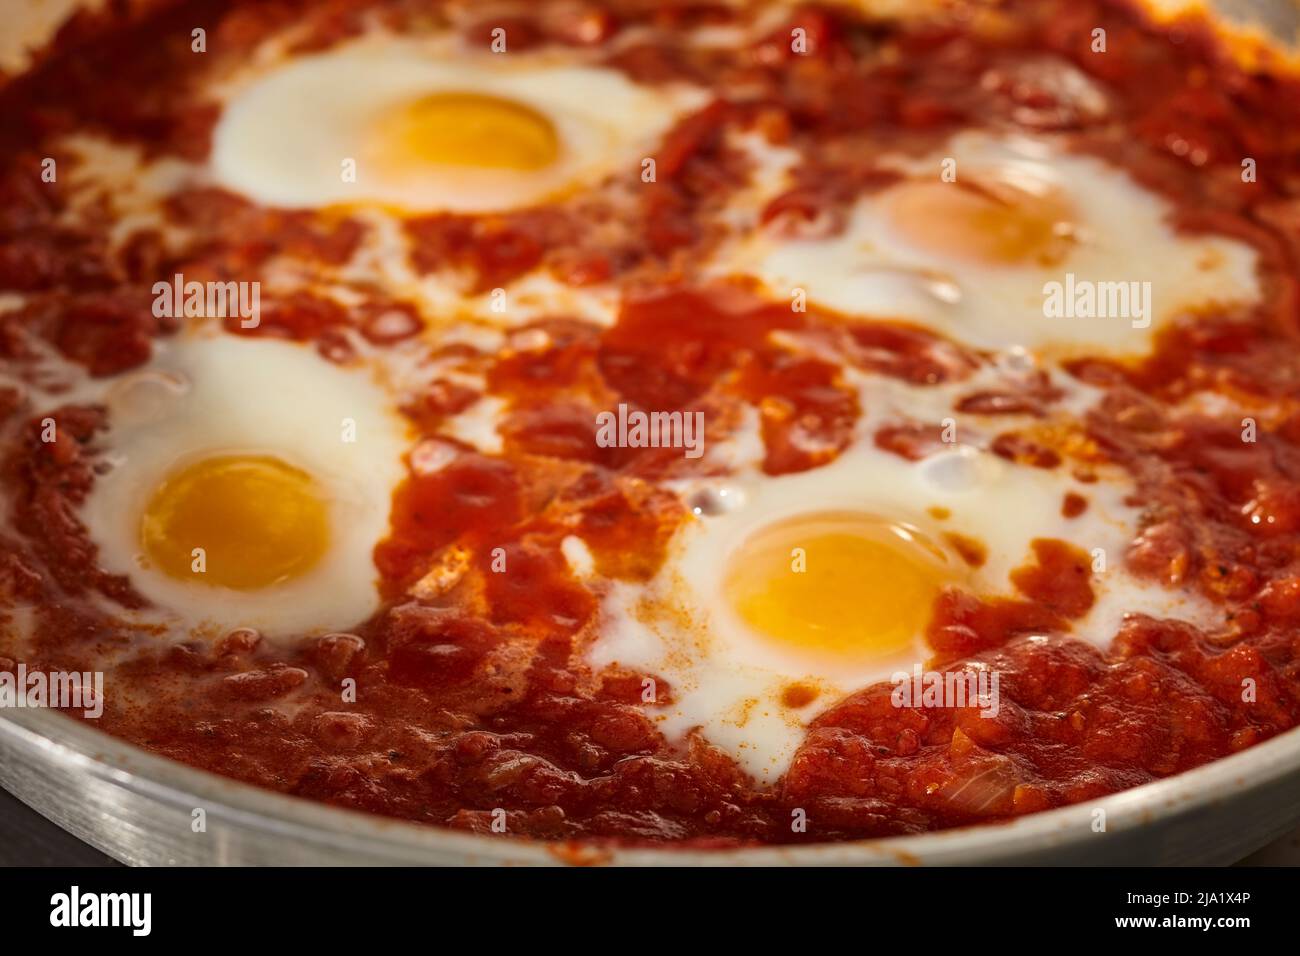 Shakshuka, the Israeli egg and tomato sauce dish, cooking in a steel skillet. Stock Photo